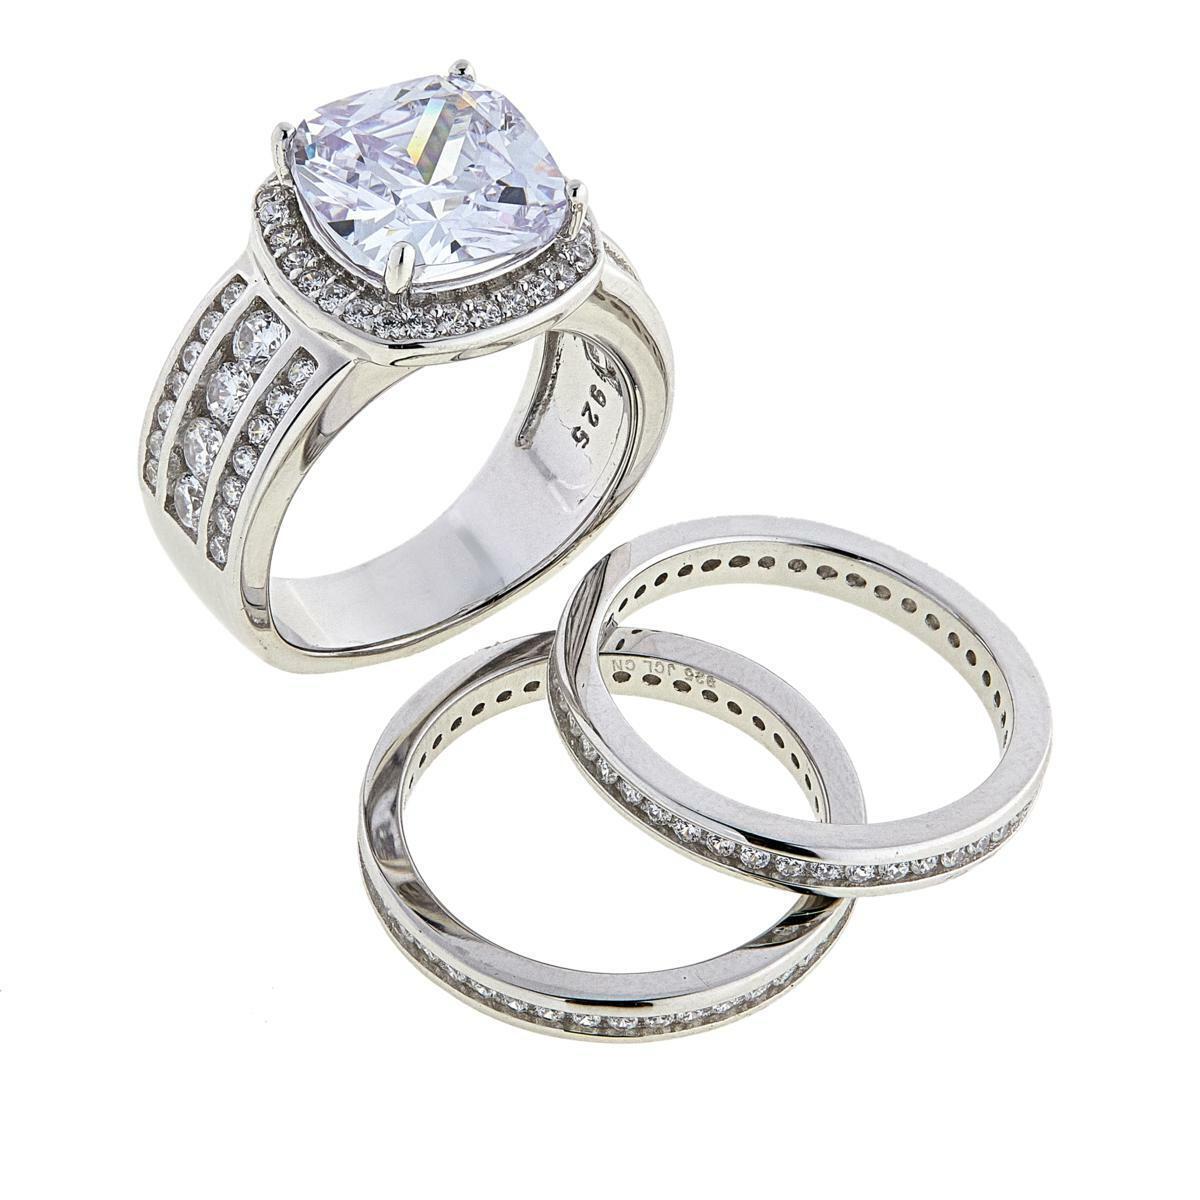 Absolute Sterling Silver 3pc Simulated Diamond Band Ring Set, Size 8